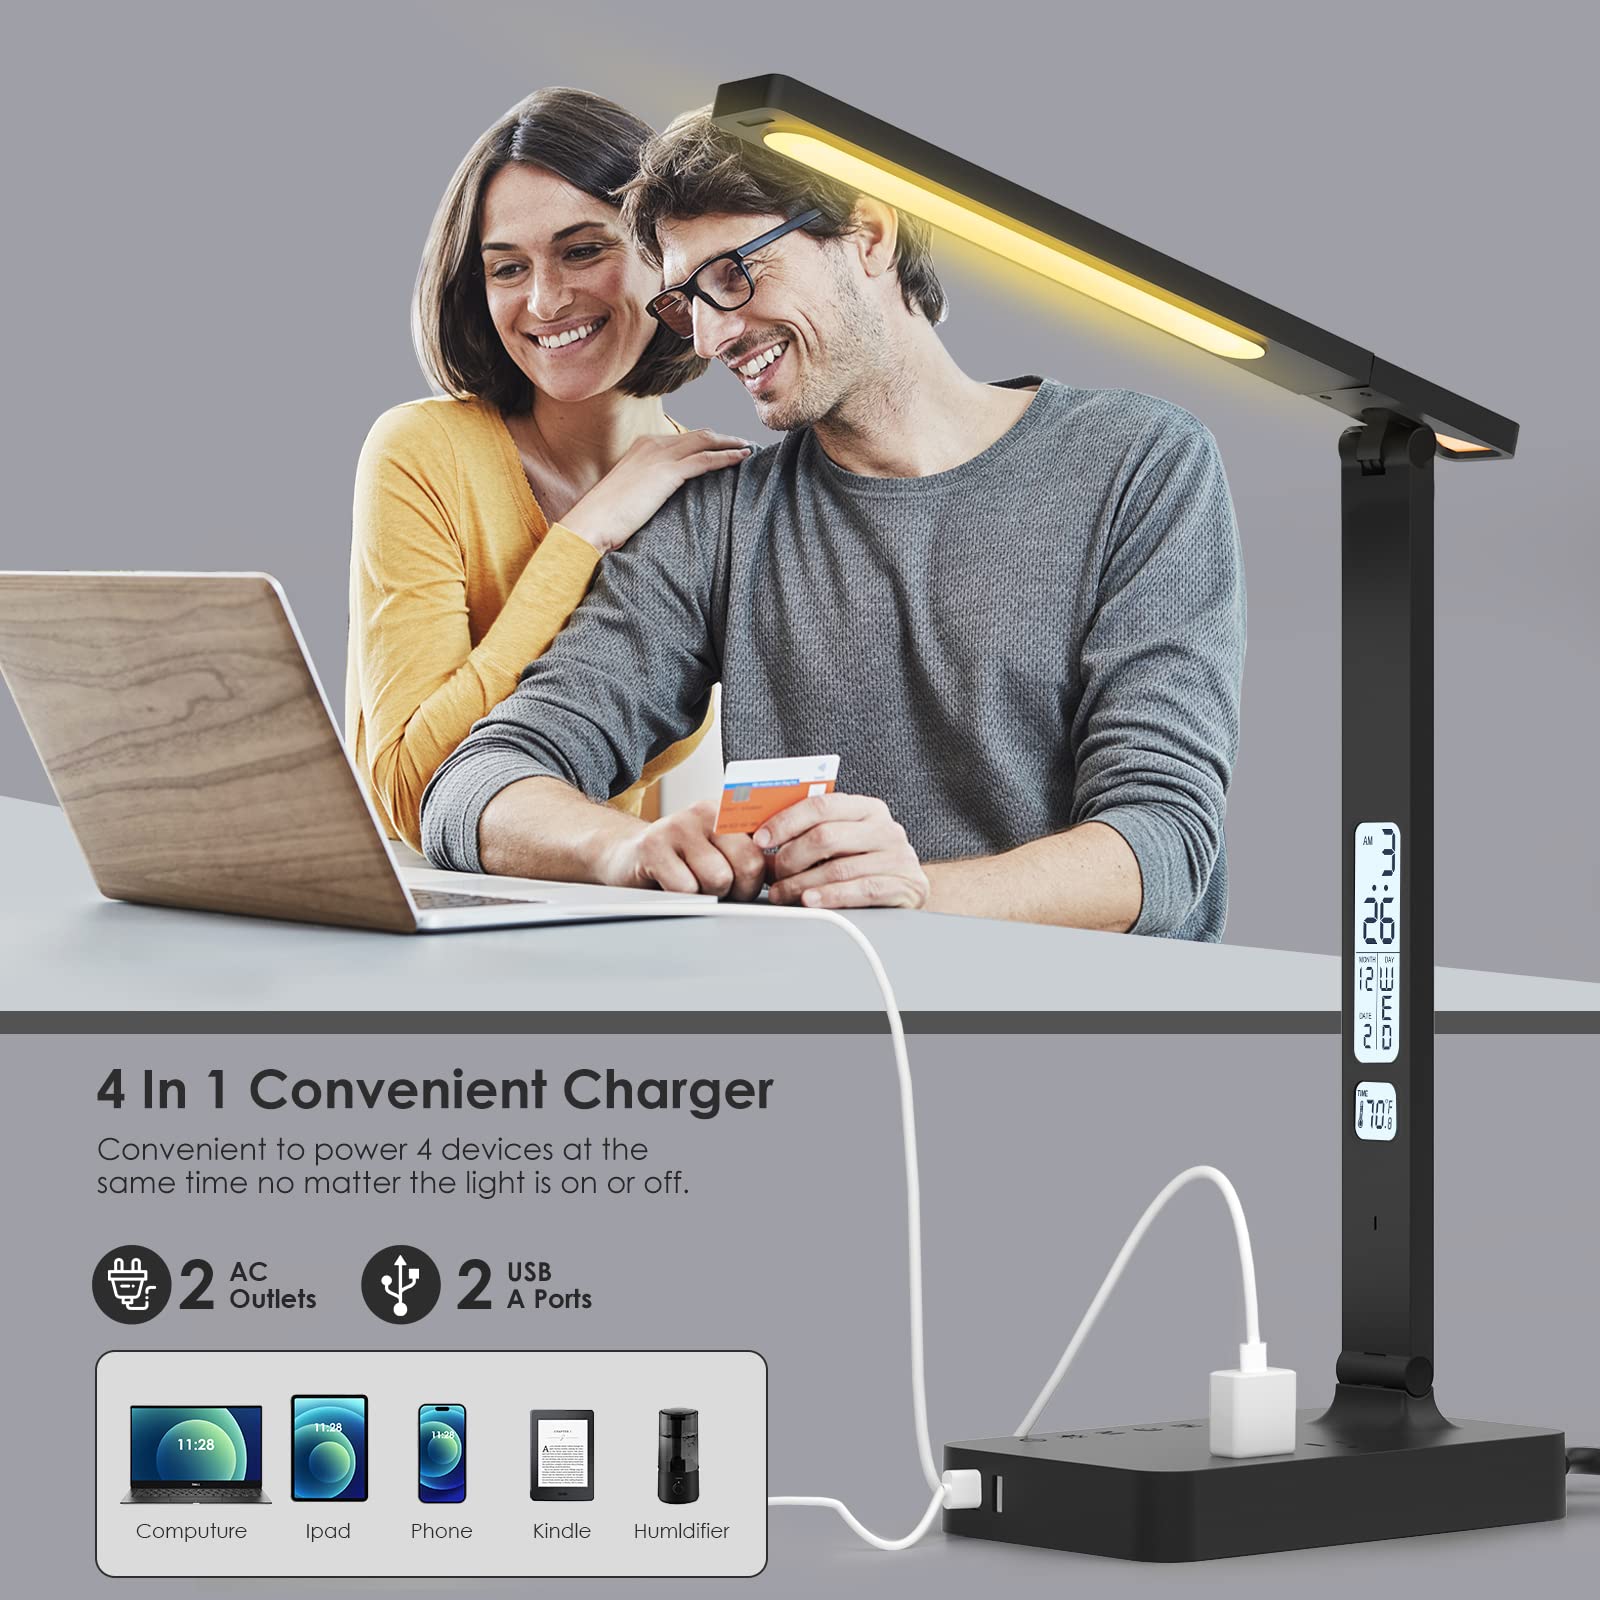 LED Desk Lamp with 2 USB Charging Ports & 2 AC Power Outlets, Desk Lamps for Home Office with Night Light & 5 Color & 5 Brightness, Touch Control Timer Desk Light with Clock, Alarm, Date, Temperature